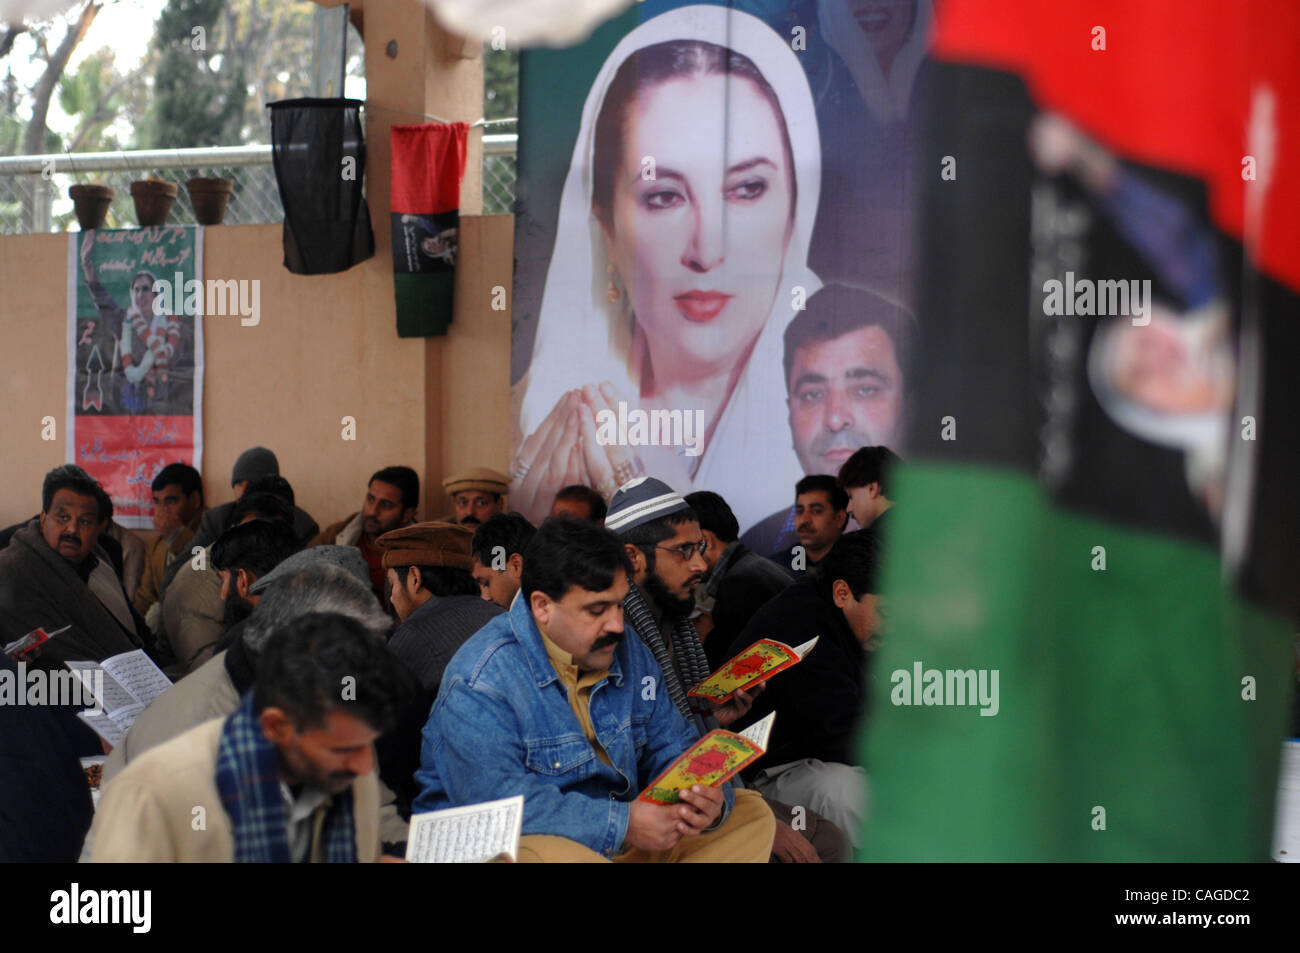 Feb 07, 2008 - Rawalpindi, Pakistan - Hundreds of Pakistanis remember former prime minister Benazir Bhutto at the spot she was assassinated by suicide bombing in late December. Bhutto's party, the Pakistan People's Party, is now headed by her widower, Asif Ali Zardari, and son Bilal. (Credit Image:  Stock Photo